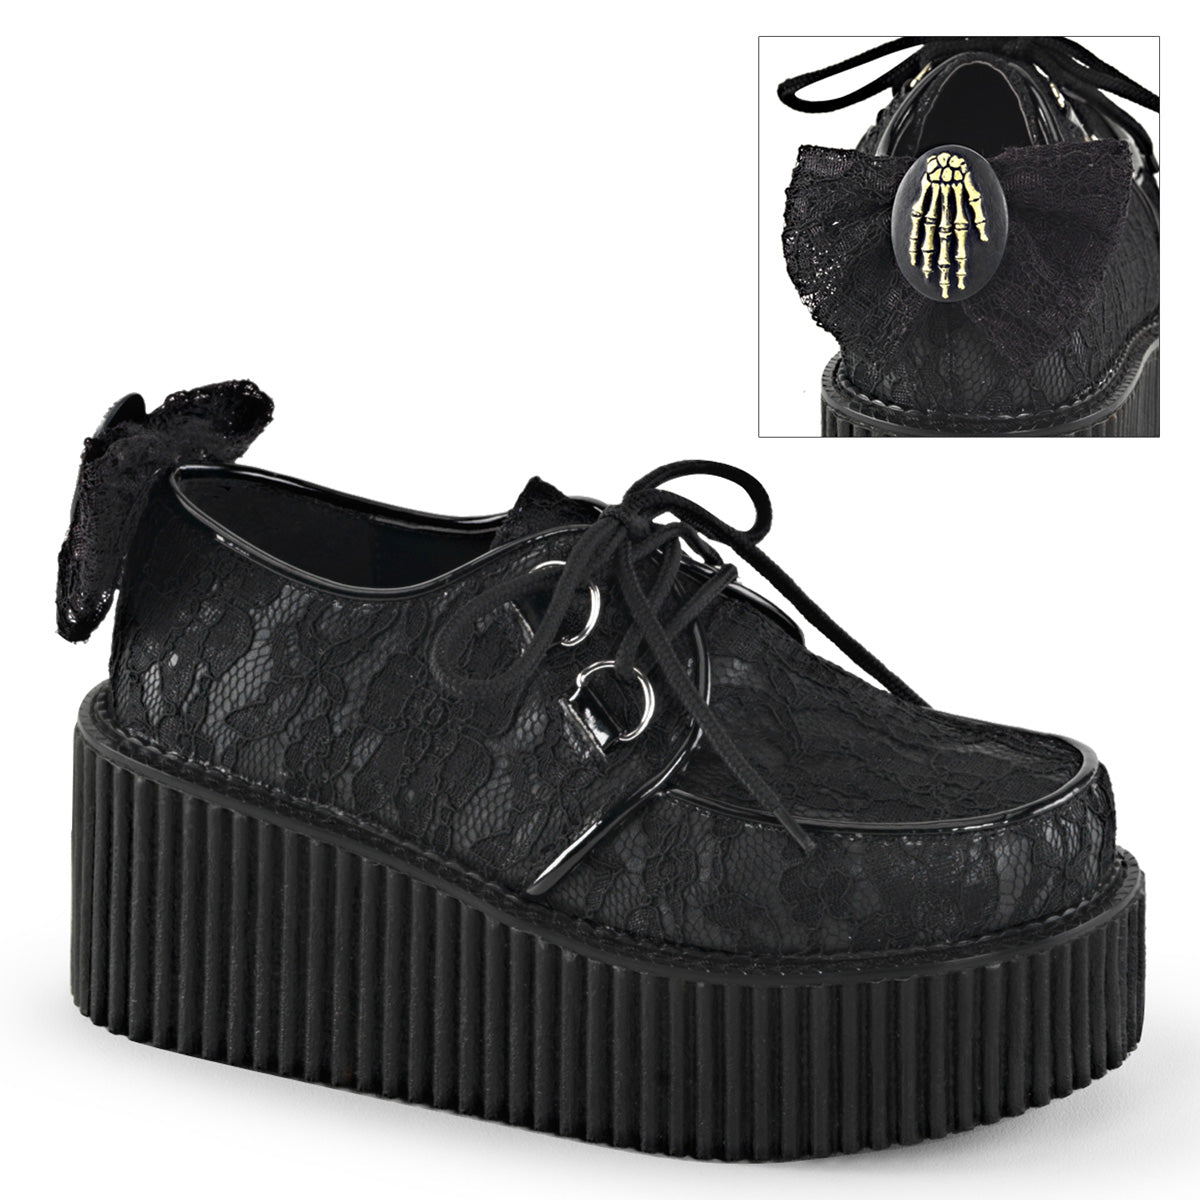 DemoniaCult Womens Low Shoe CREEPER-212 Blk Vegan Leather-Lace